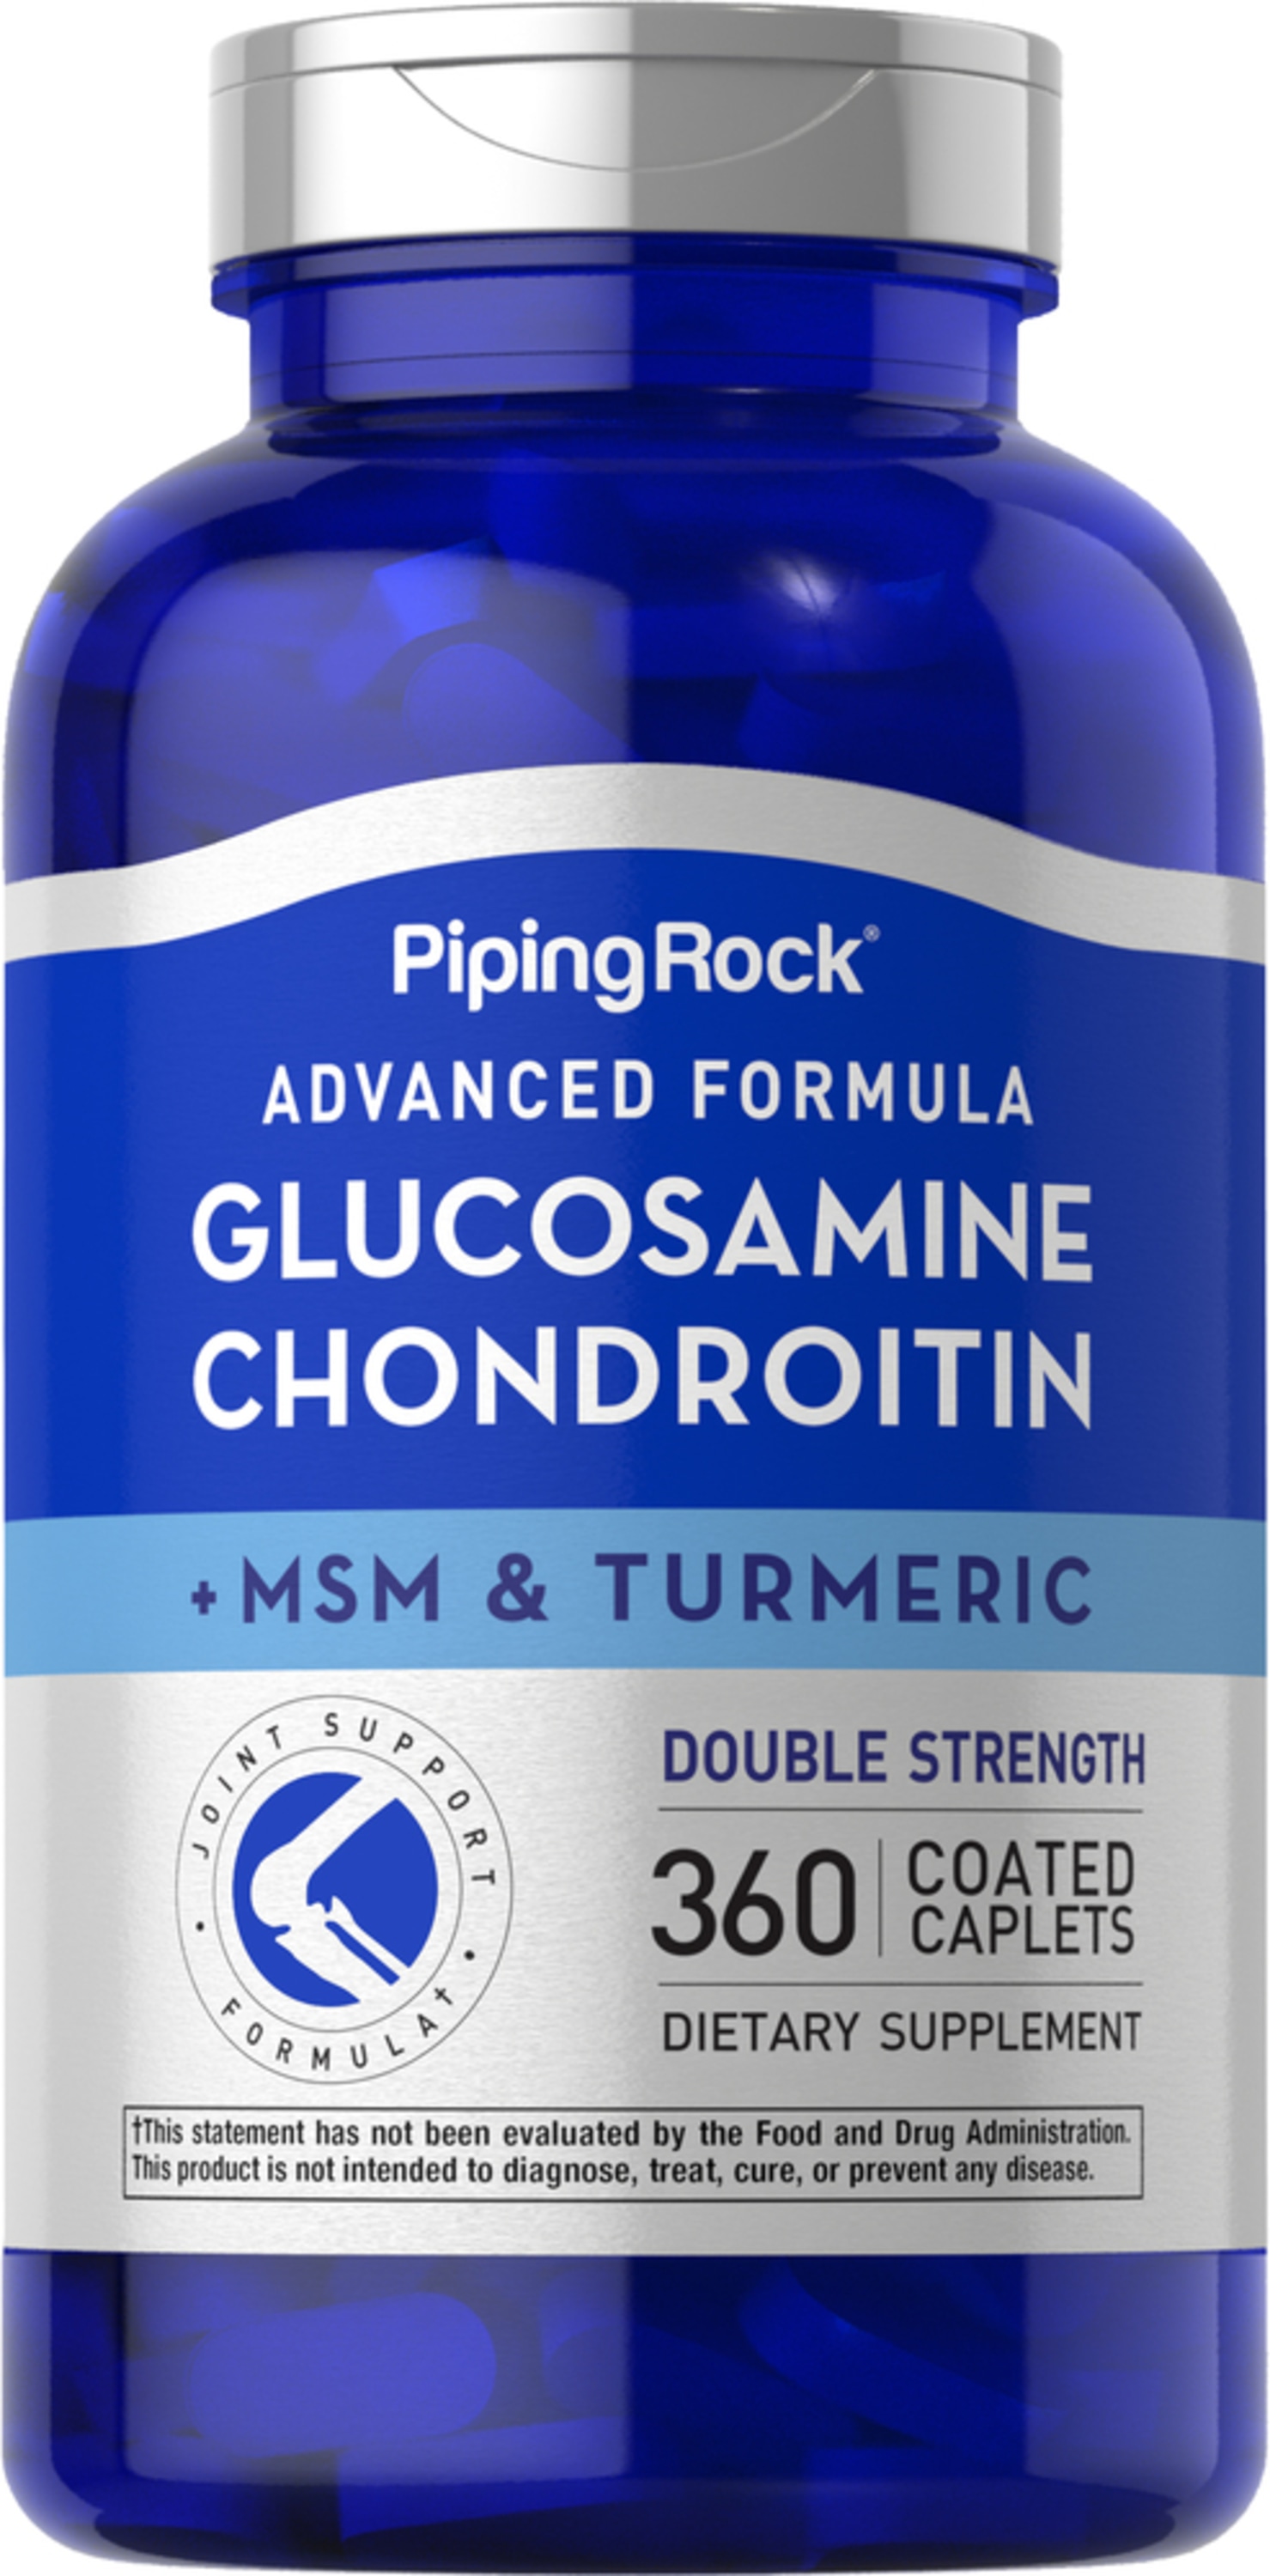 Advanced Double Glucosamine Chondroitin MSM Plus Turmeric, 360 Coated Caplets | PipingRock Health Products